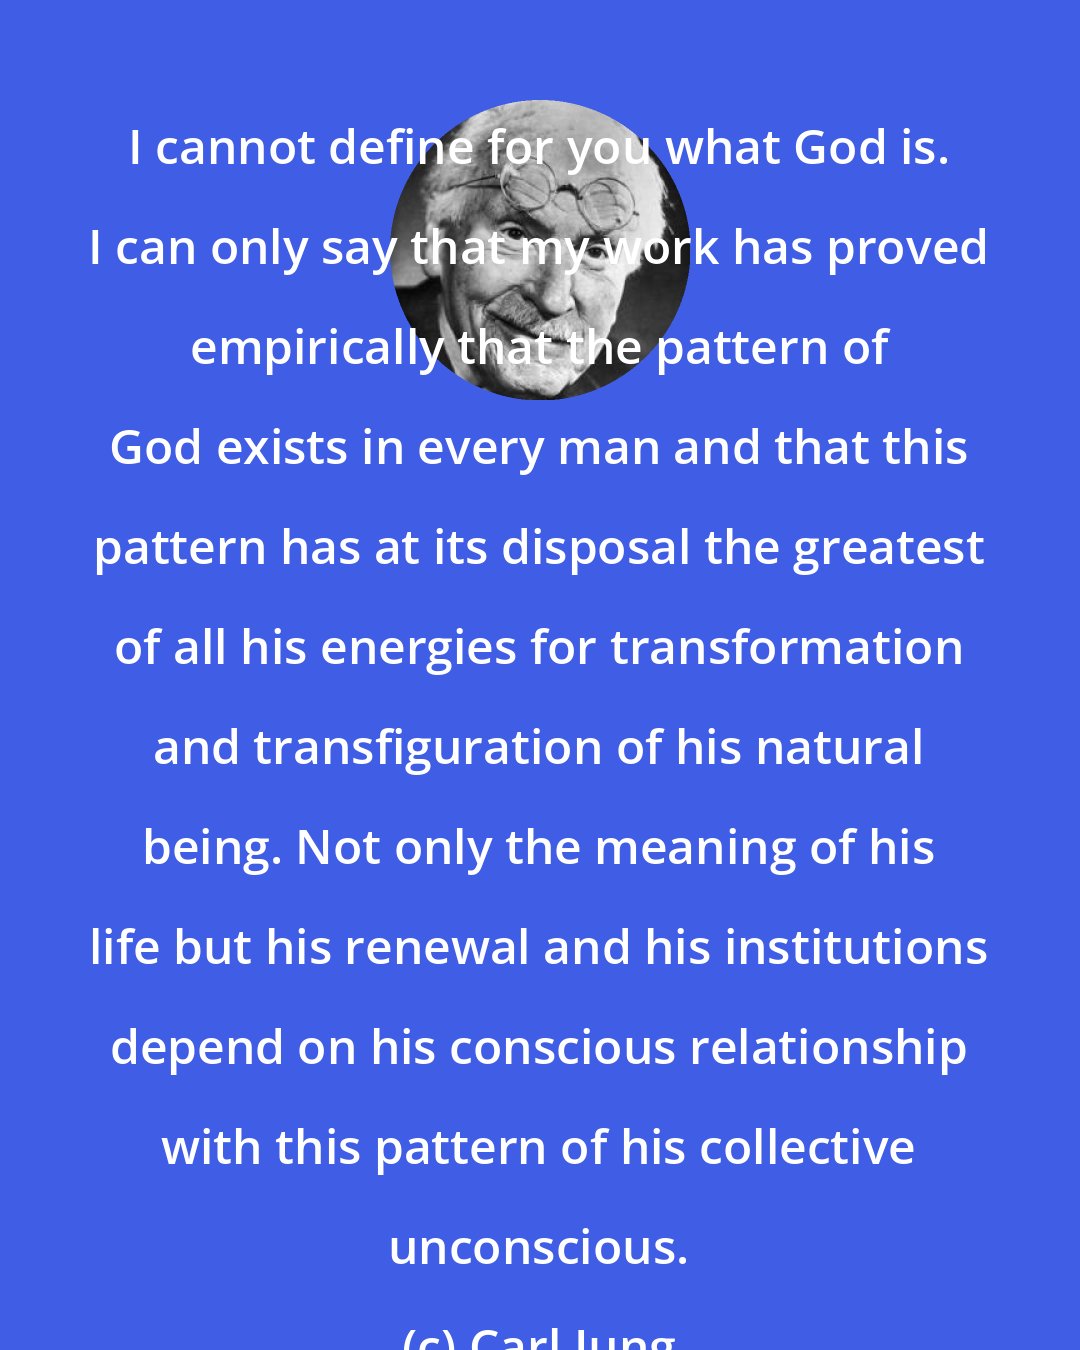 Carl Jung: I cannot define for you what God is. I can only say that my work has proved empirically that the pattern of God exists in every man and that this pattern has at its disposal the greatest of all his energies for transformation and transfiguration of his natural being. Not only the meaning of his life but his renewal and his institutions depend on his conscious relationship with this pattern of his collective unconscious.